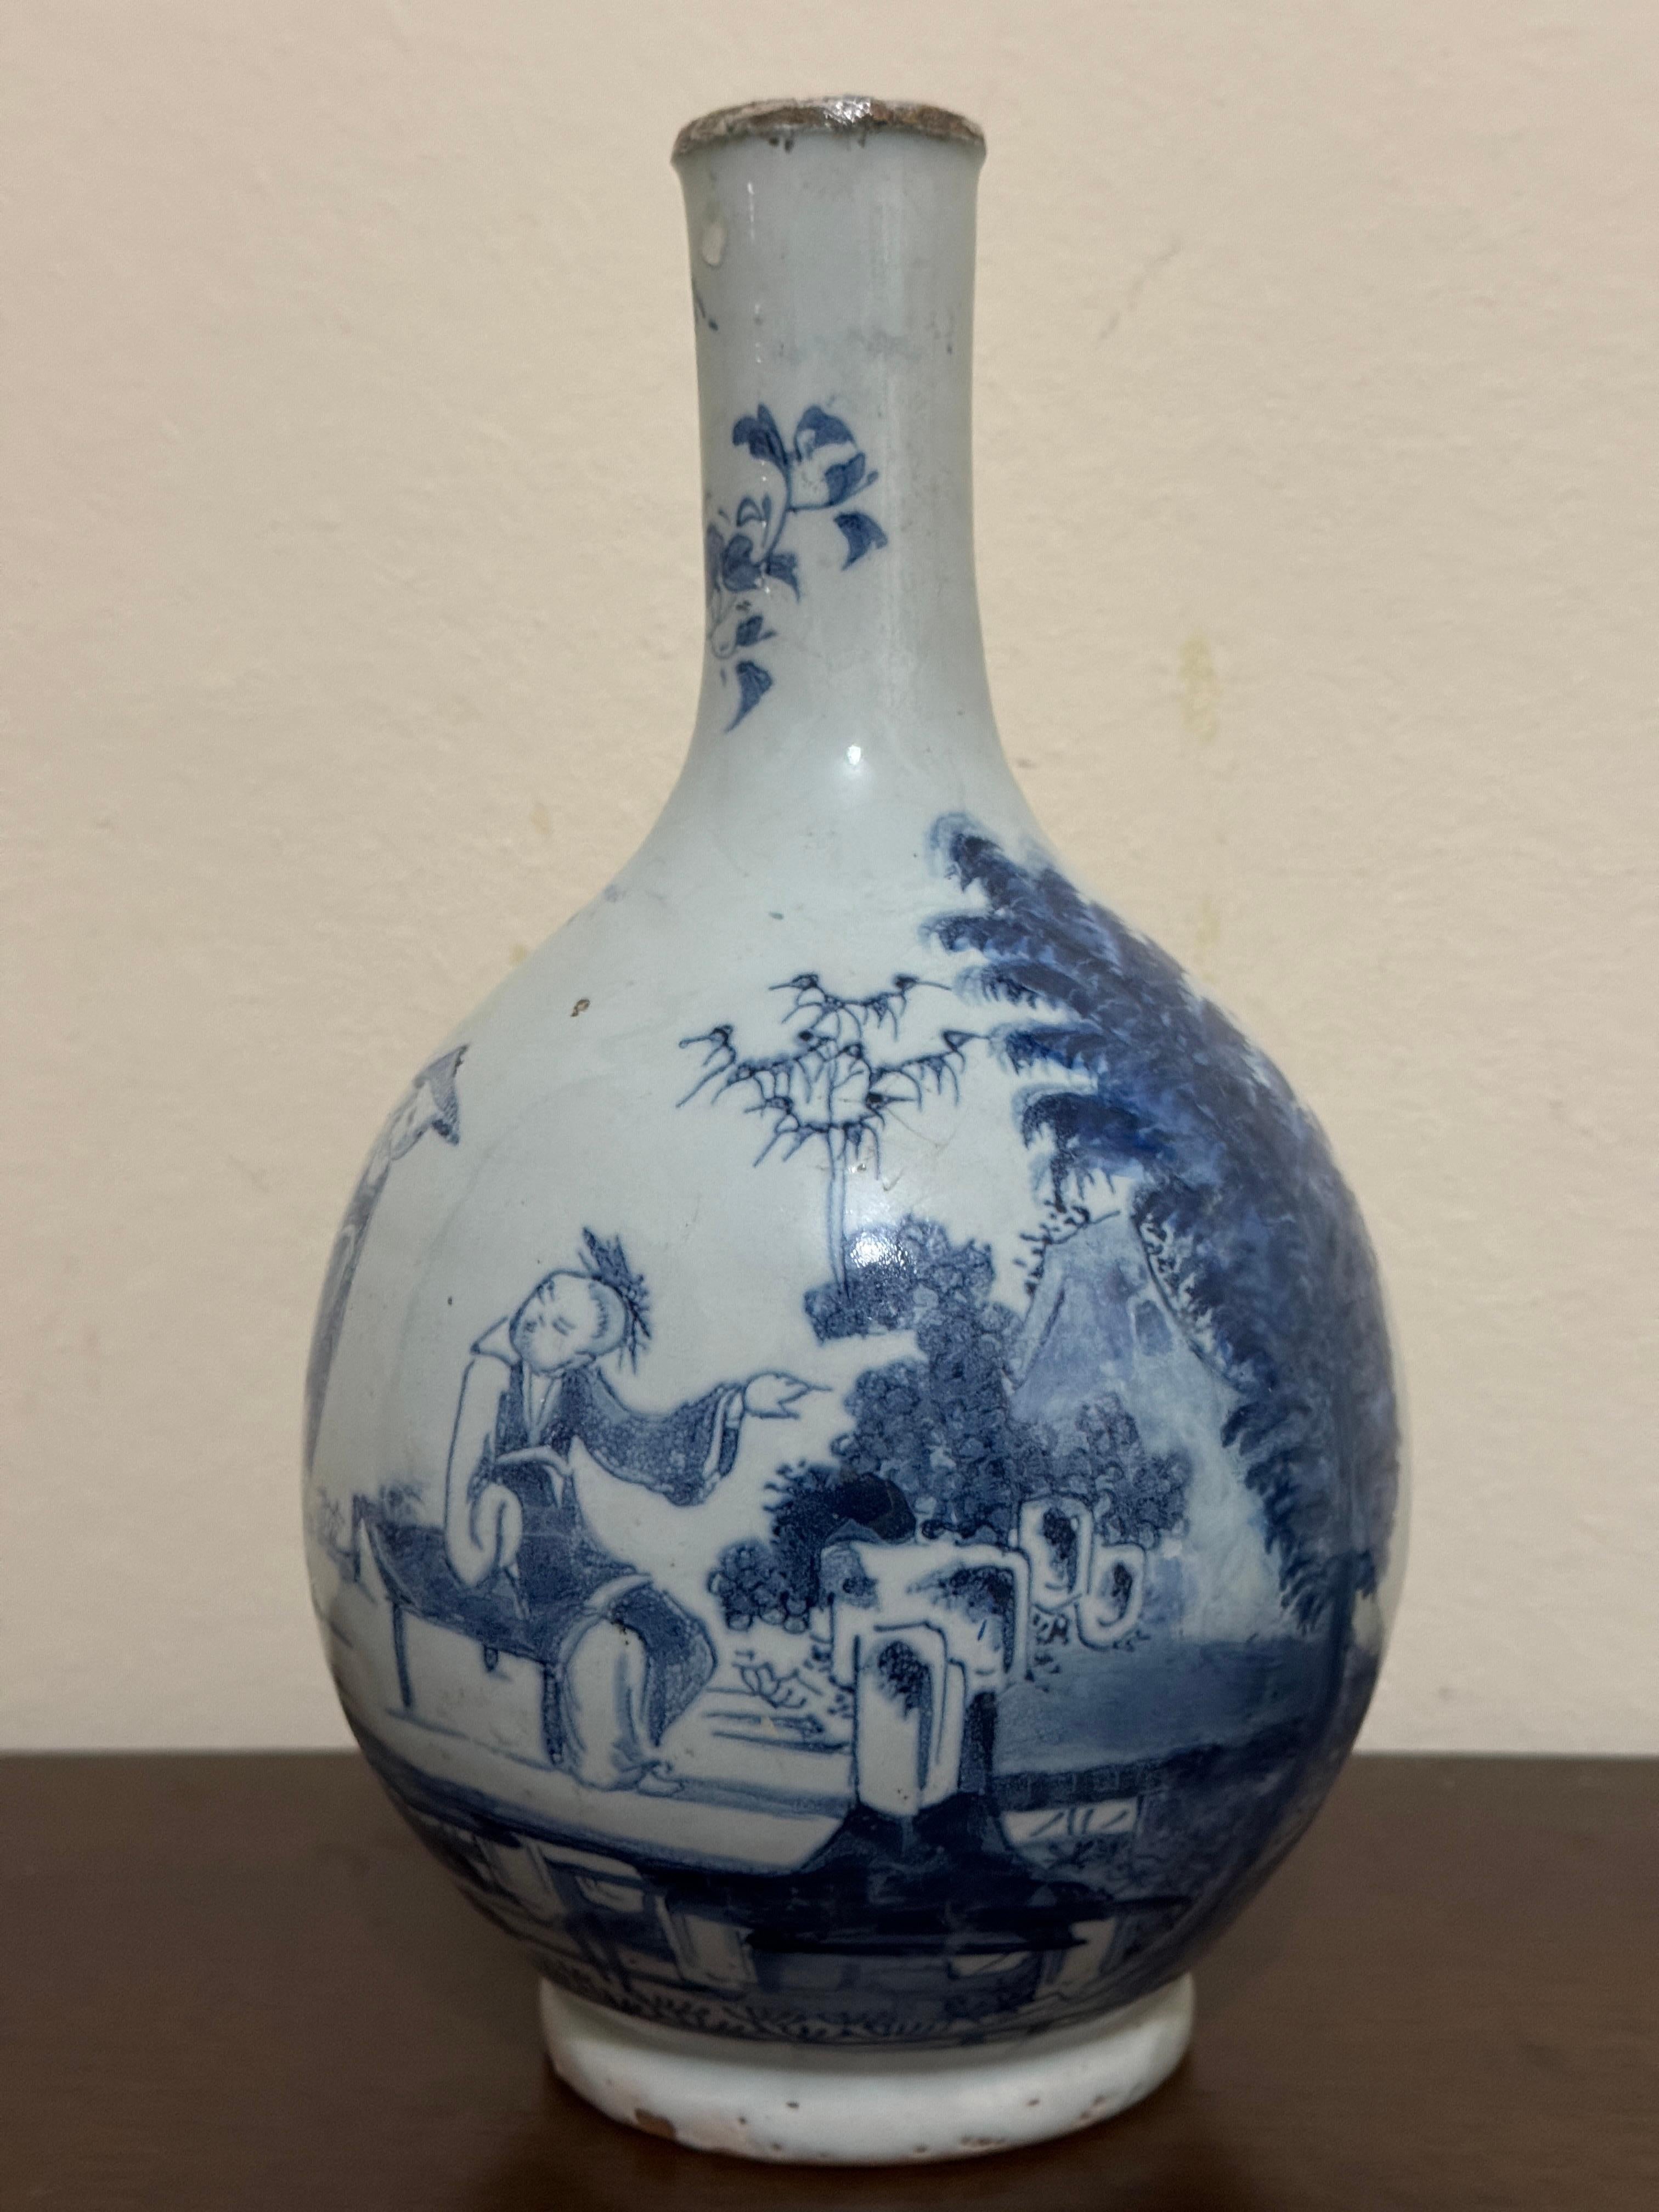 18th Century Blue and White Delftware Bottle, English and probably from the Lambeth pottery in London, tin glazed earthenware with a hand painted oriental scenes. Height 9